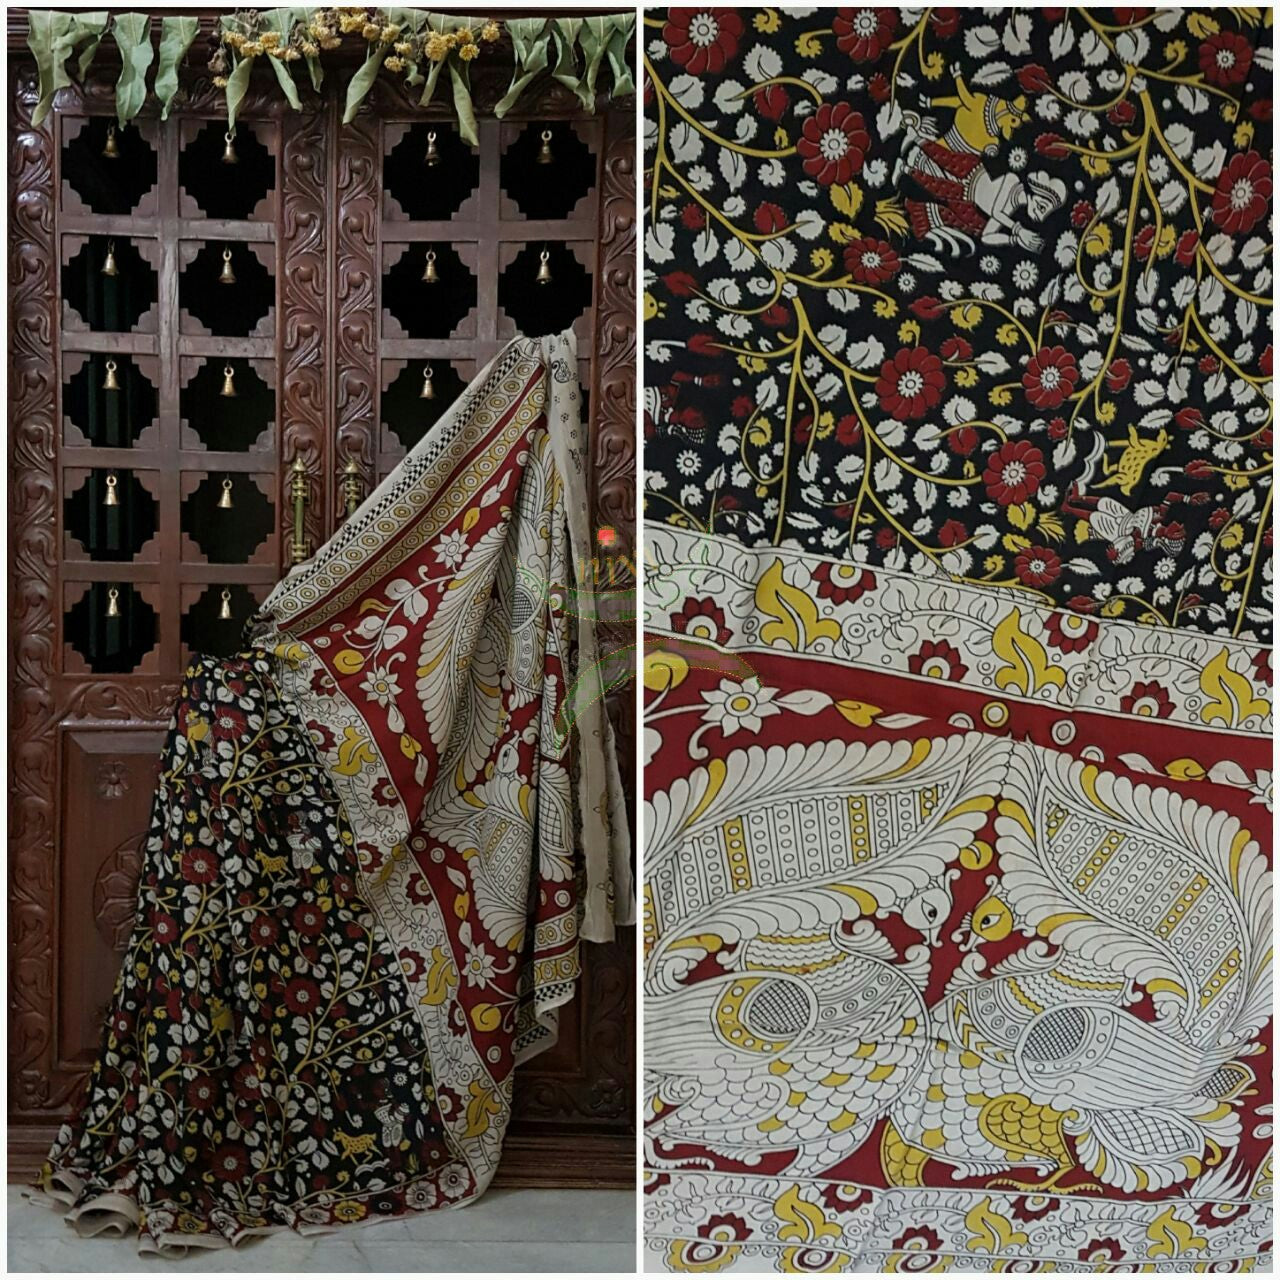 Black and off white chennur silk kalamkari with intricate peacock motif on pallu and floral motif all over the saree.